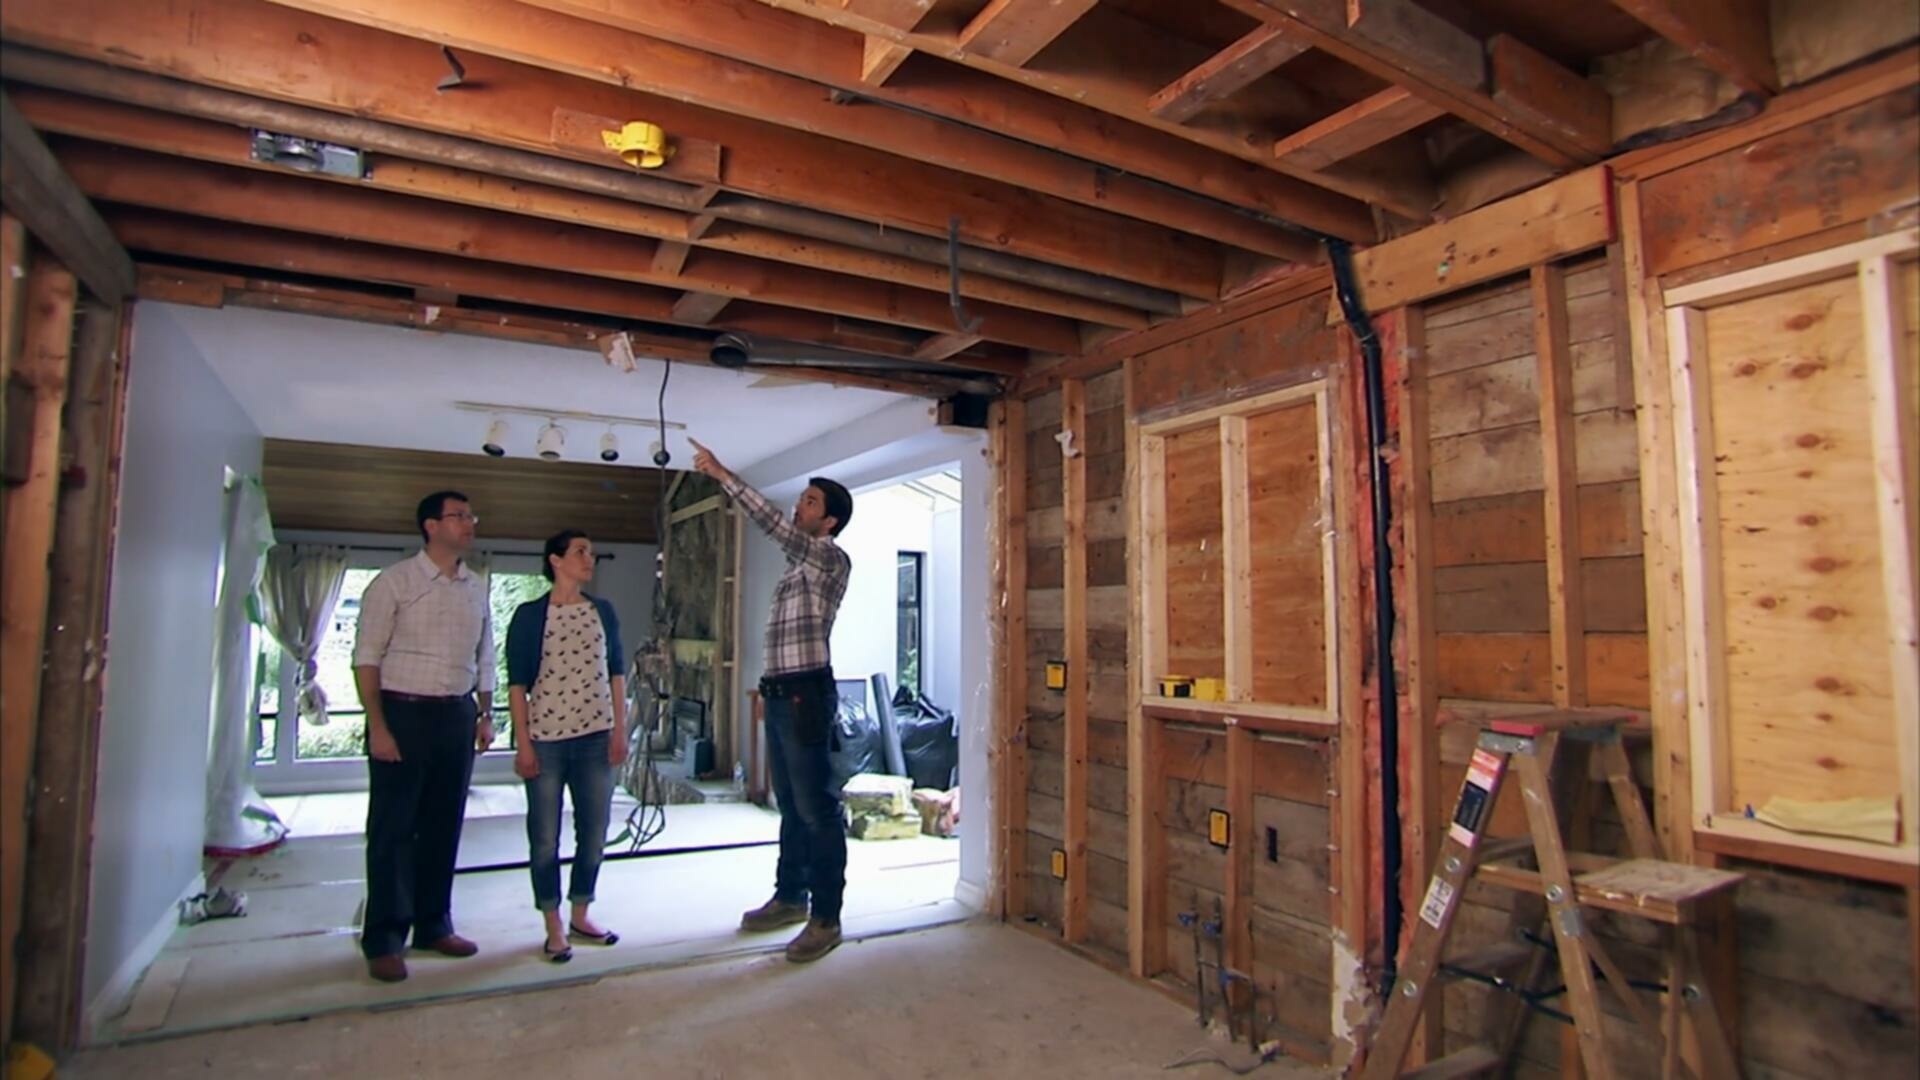 Property Brothers S05E07 Danielle and Chad 1080p MAX WEB DL DDP2 0 H 264 NTb TGx